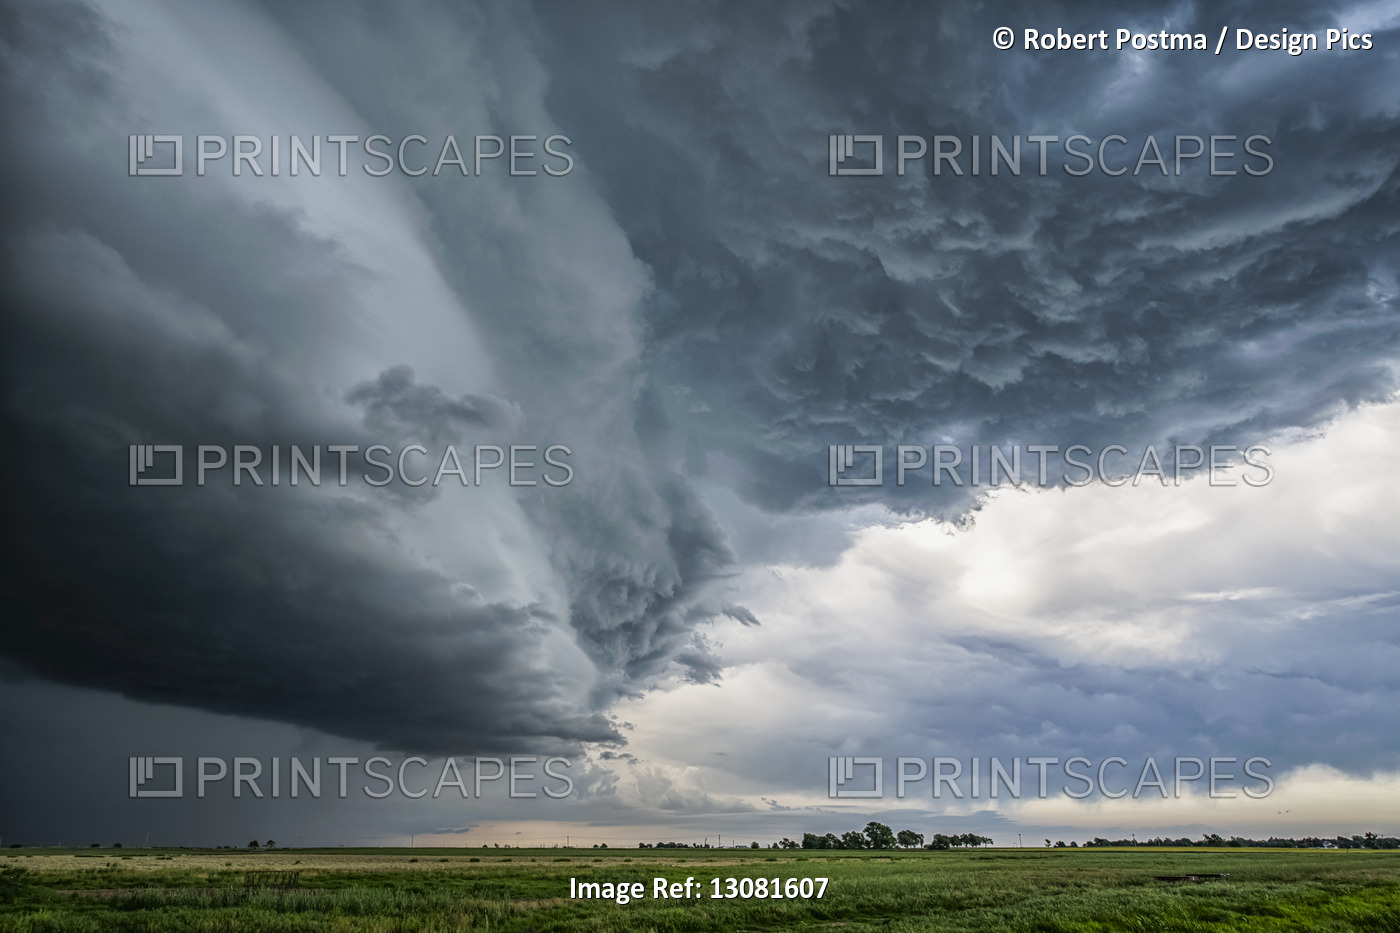 Supercell thunderstorm clouds show off the power of mother nature. Massive ...